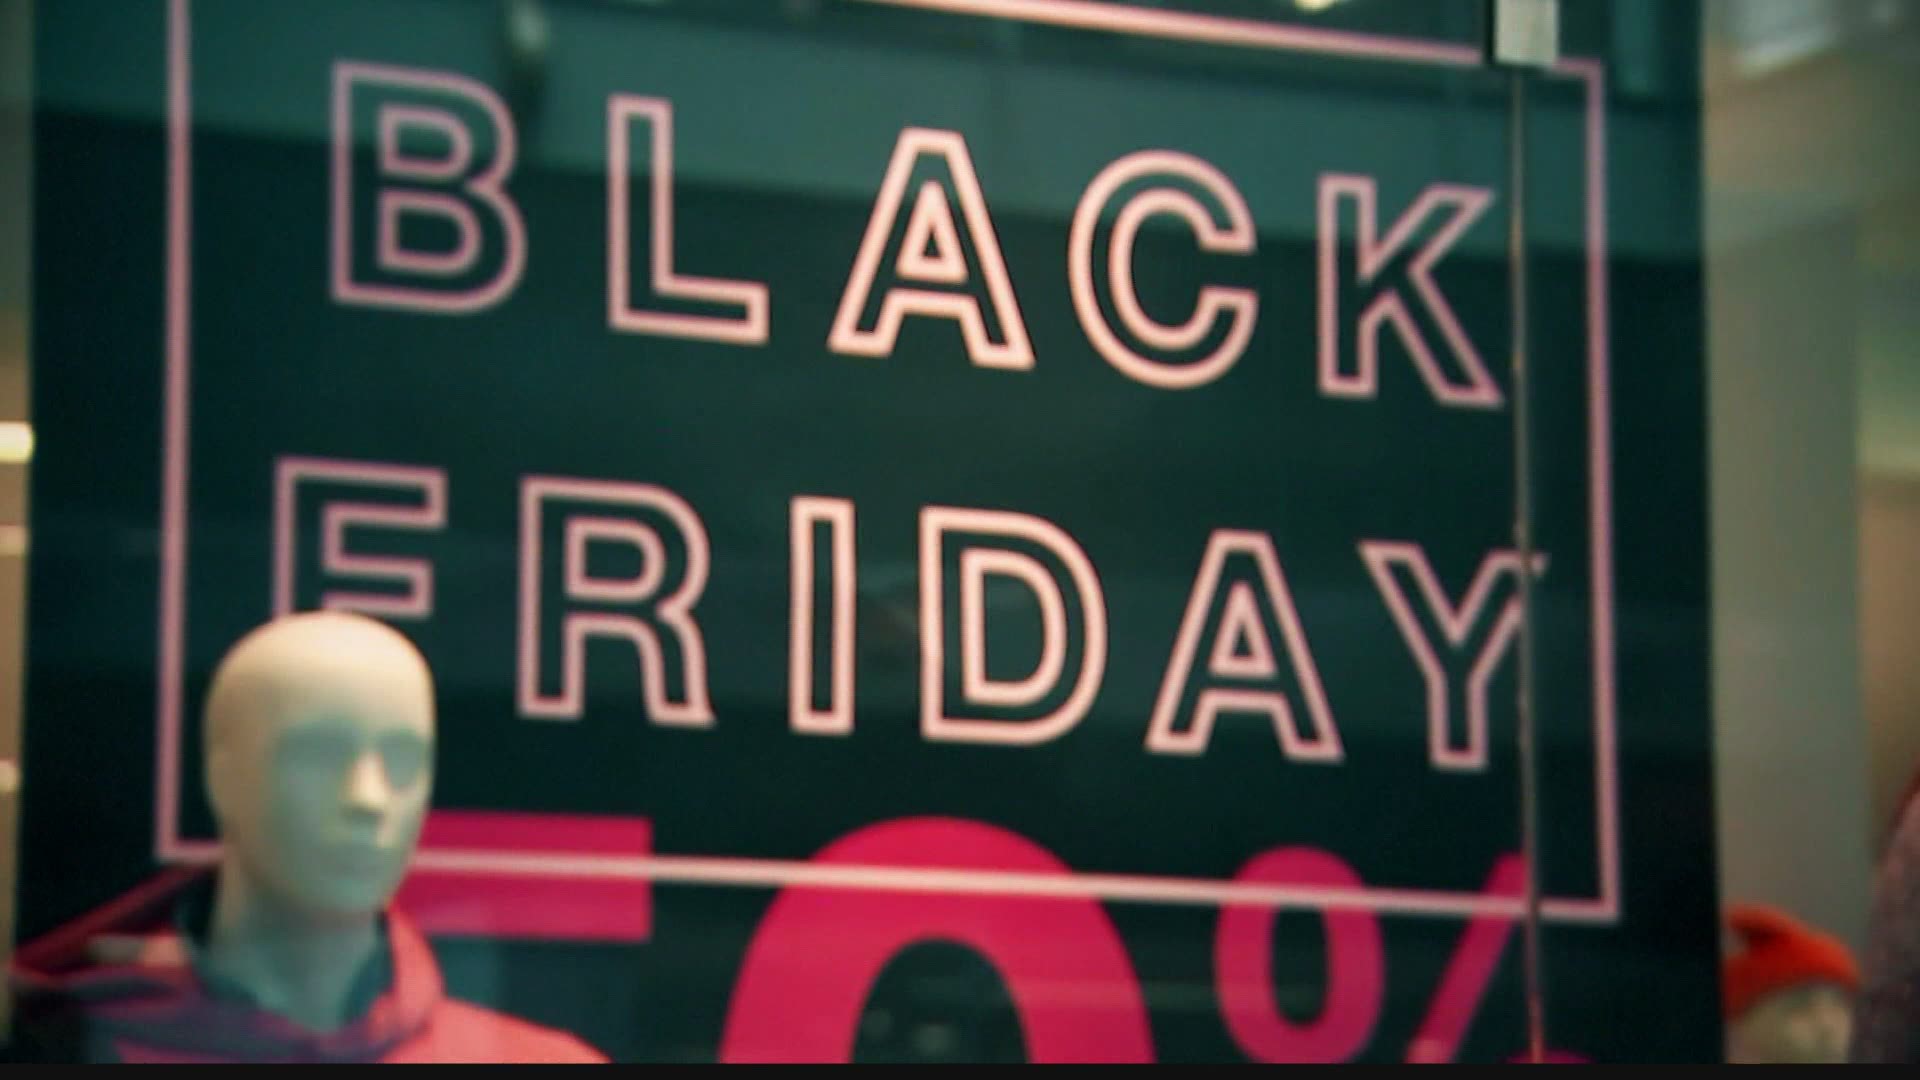 Every store is treating Black Friday differently this year, and Cherie Lowe breaks down how to find the best deals.